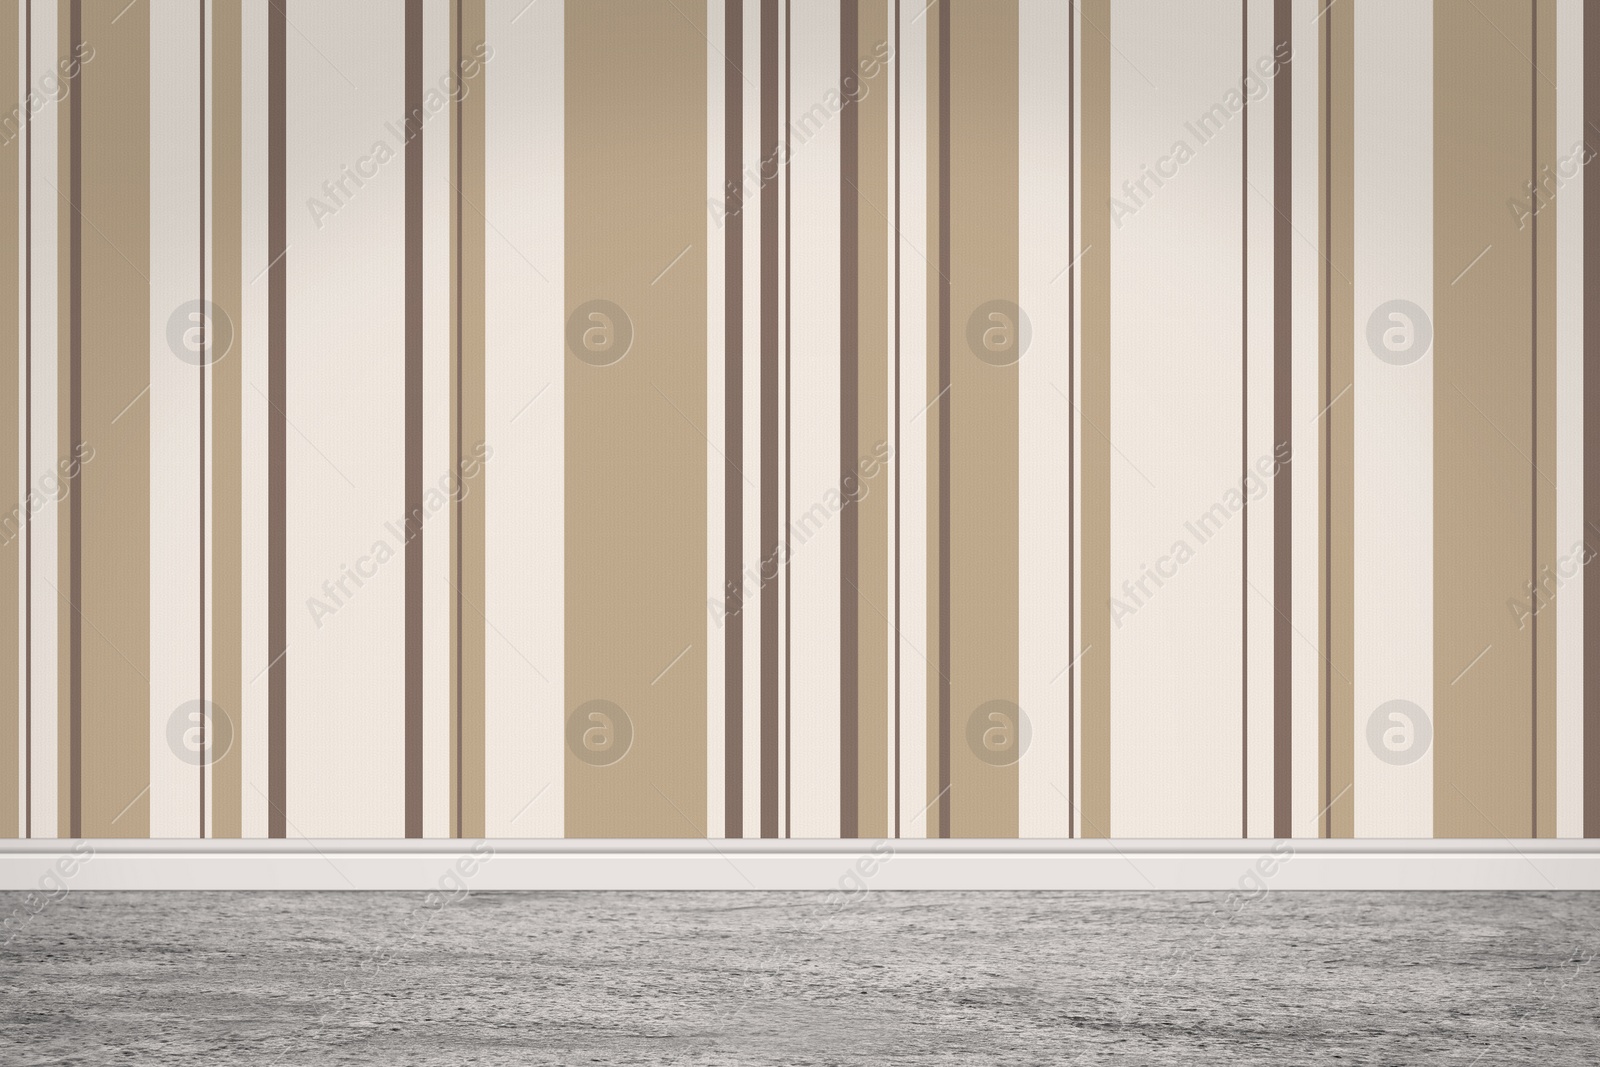 Image of Striped wallpaper and grey floor in room